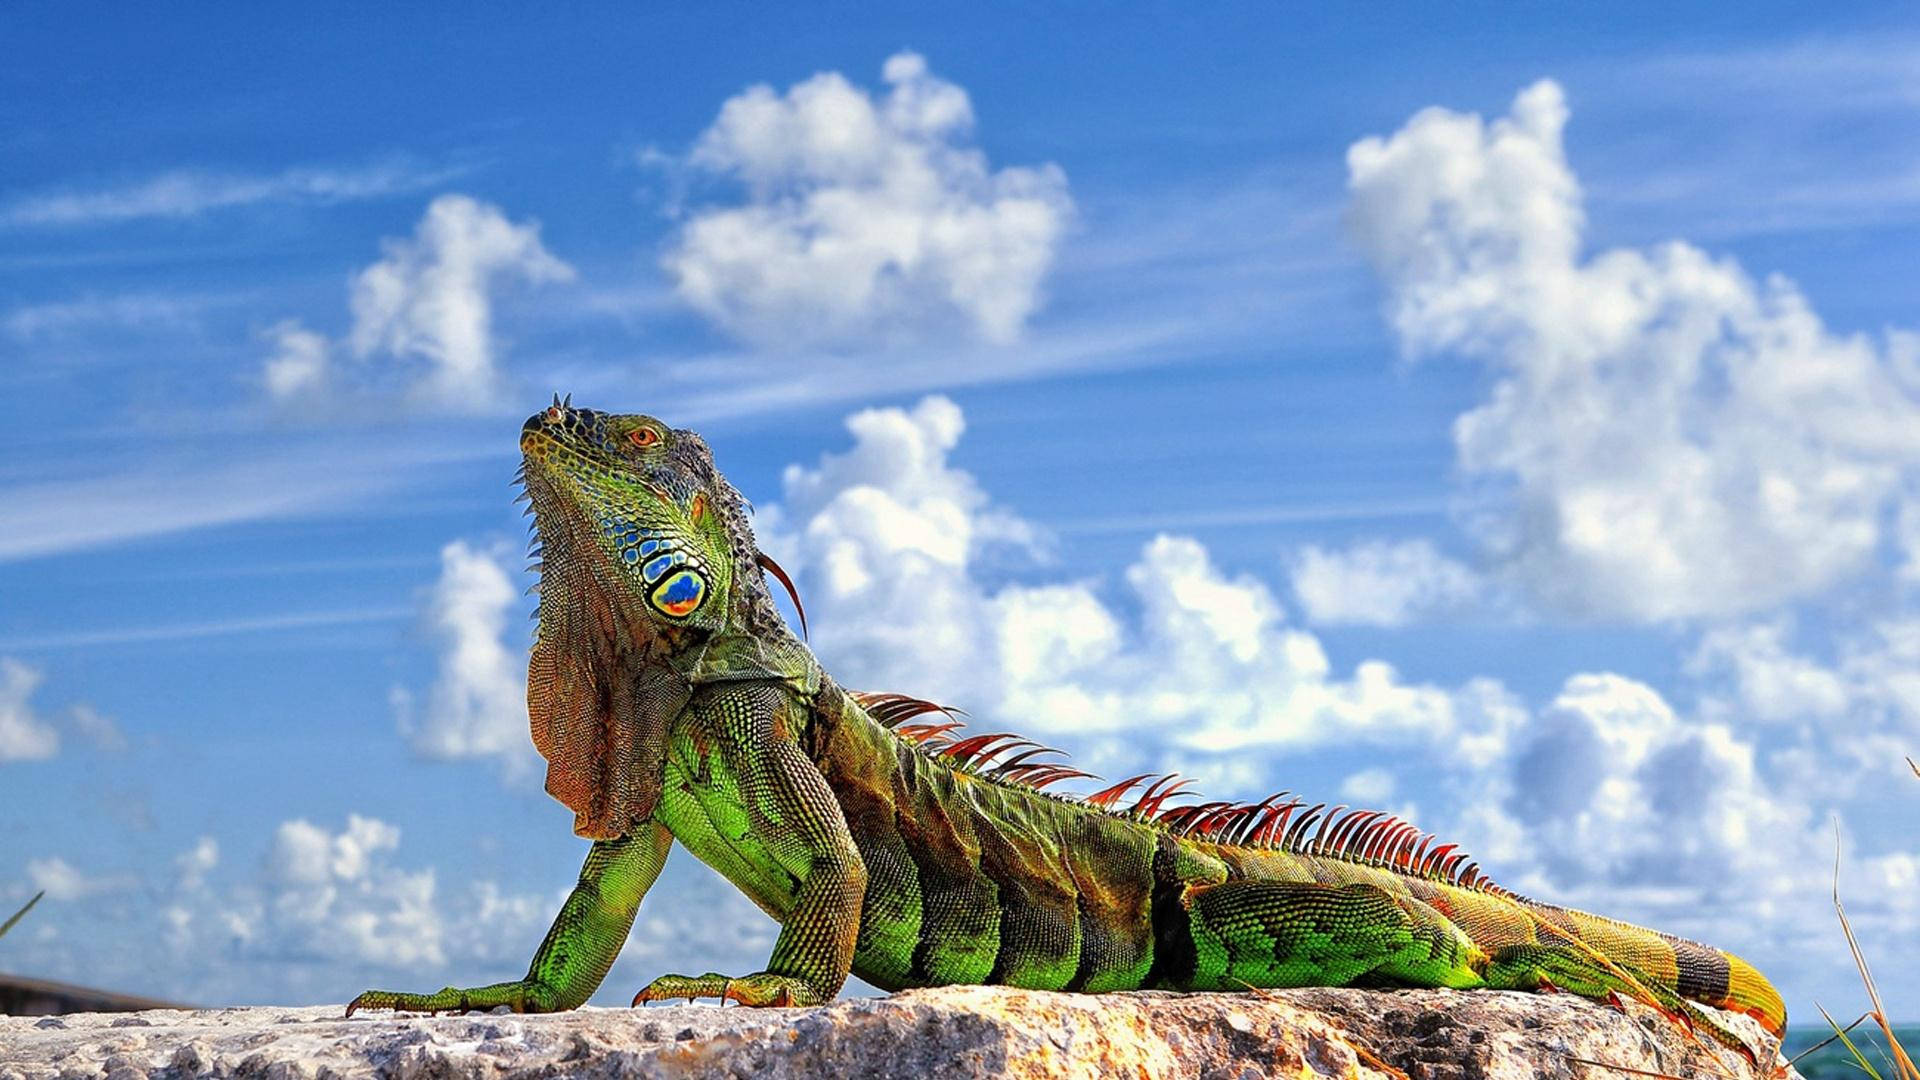 Green Iguana With Cloudy Sky Wallpaper